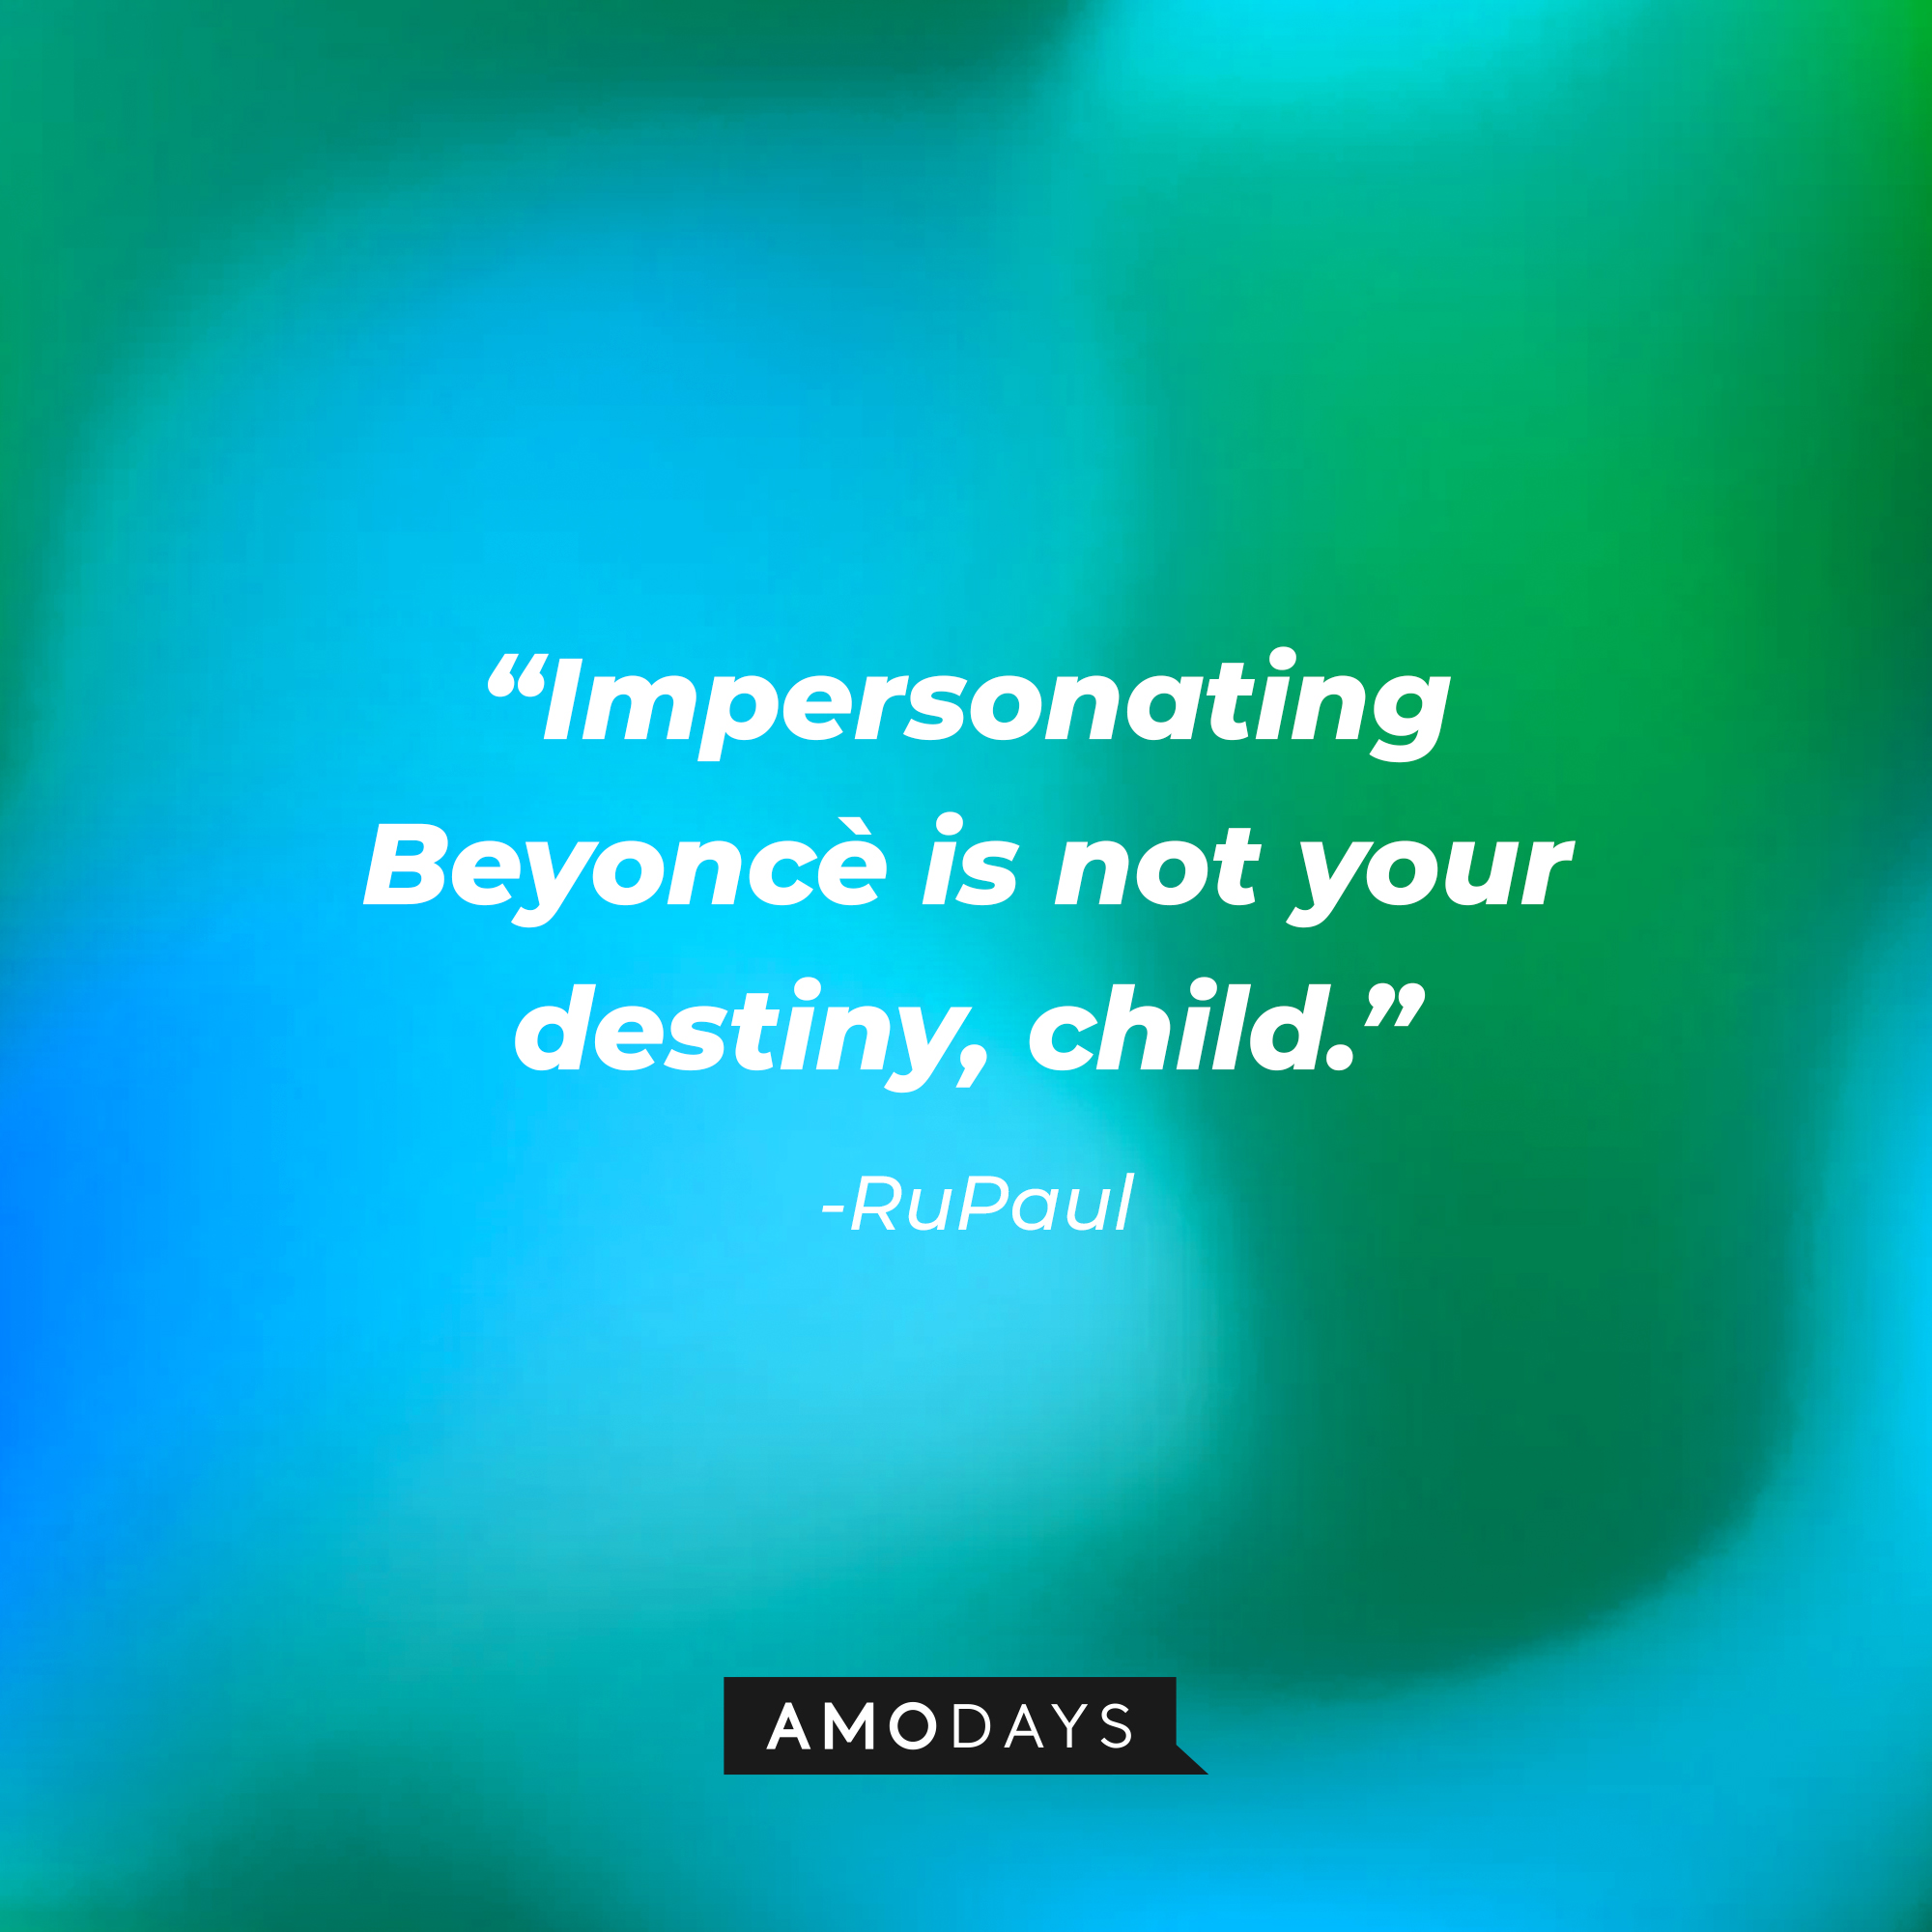 RuPaul’s quote: “Impersonating Beyoncé is not your destiny, child.” |  Source: AmoDays